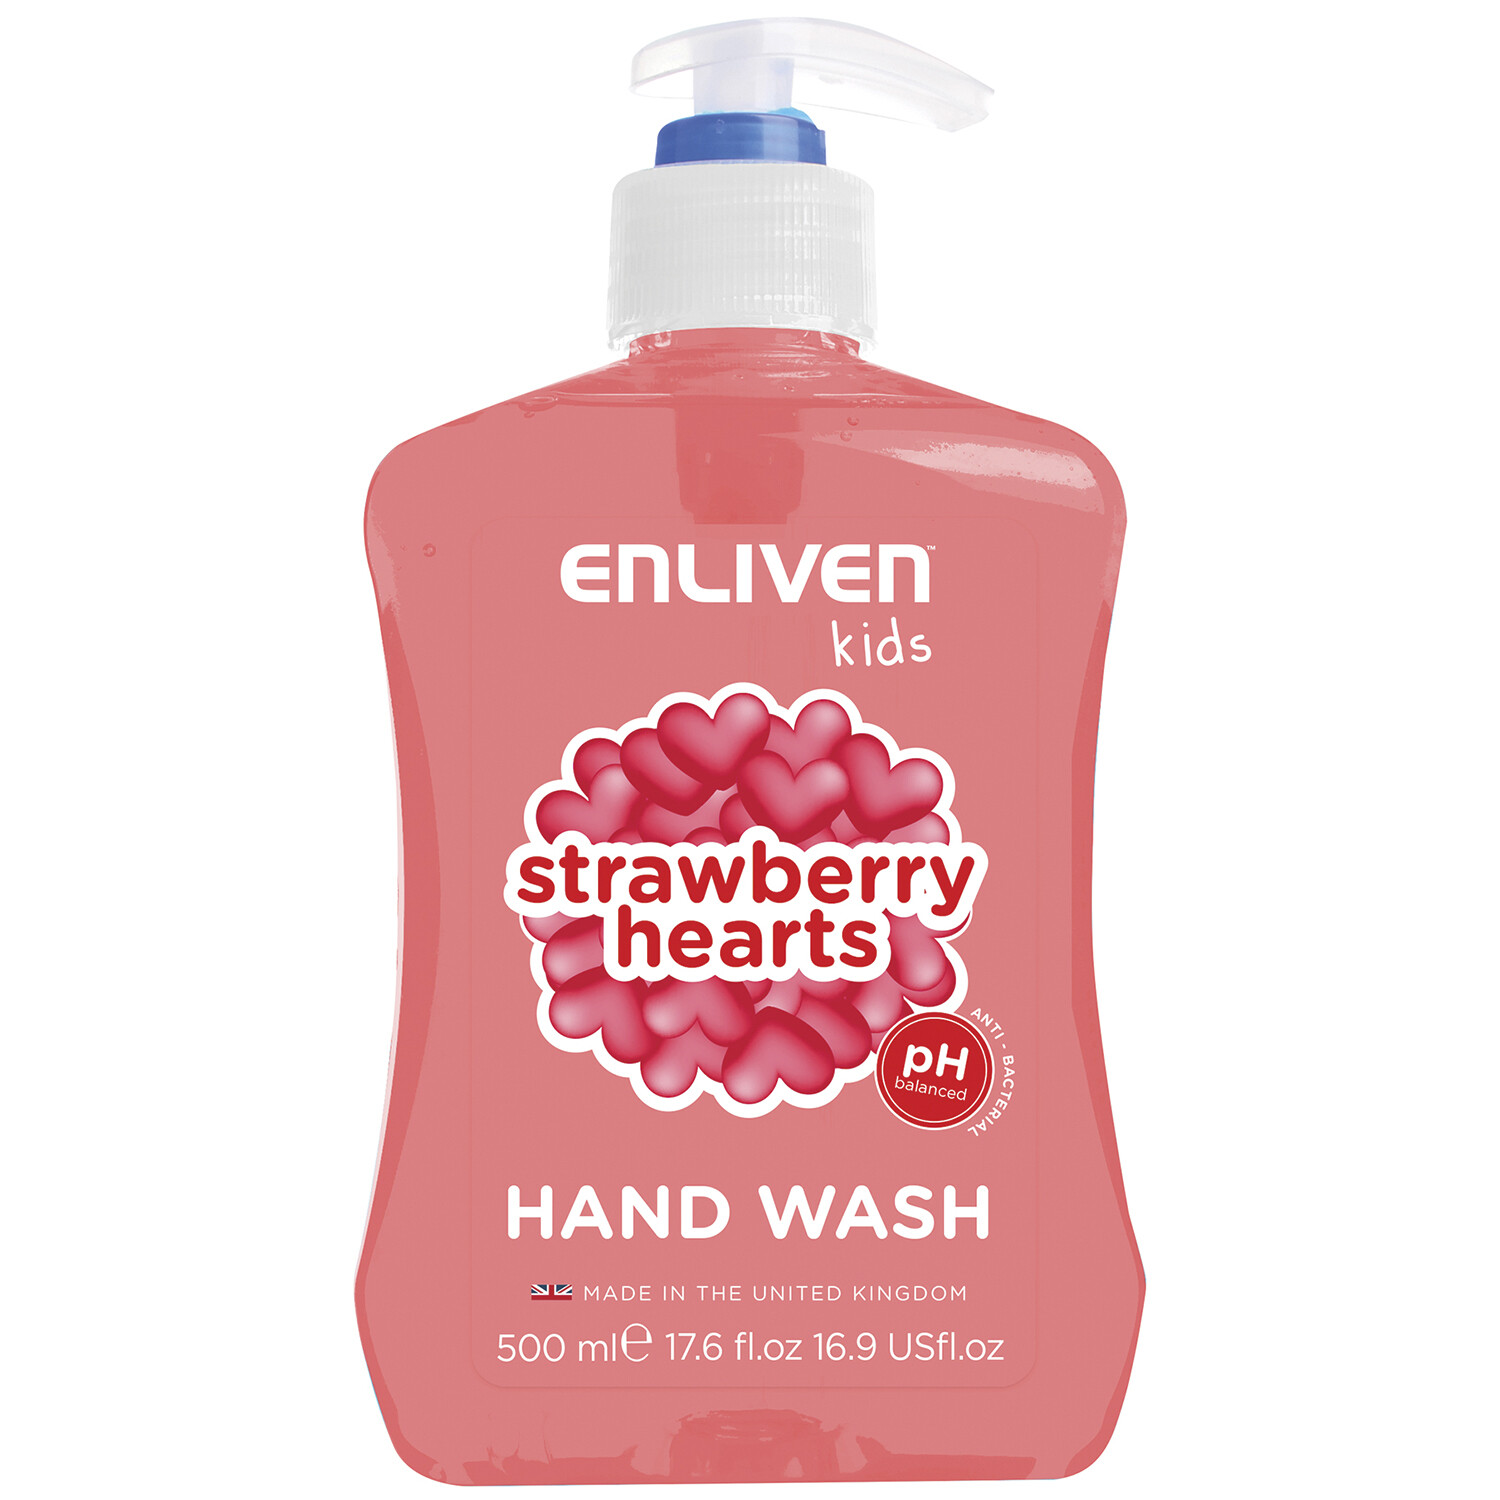 Enliven Kids Strawberry Hearts Hand Wash 500ml Image